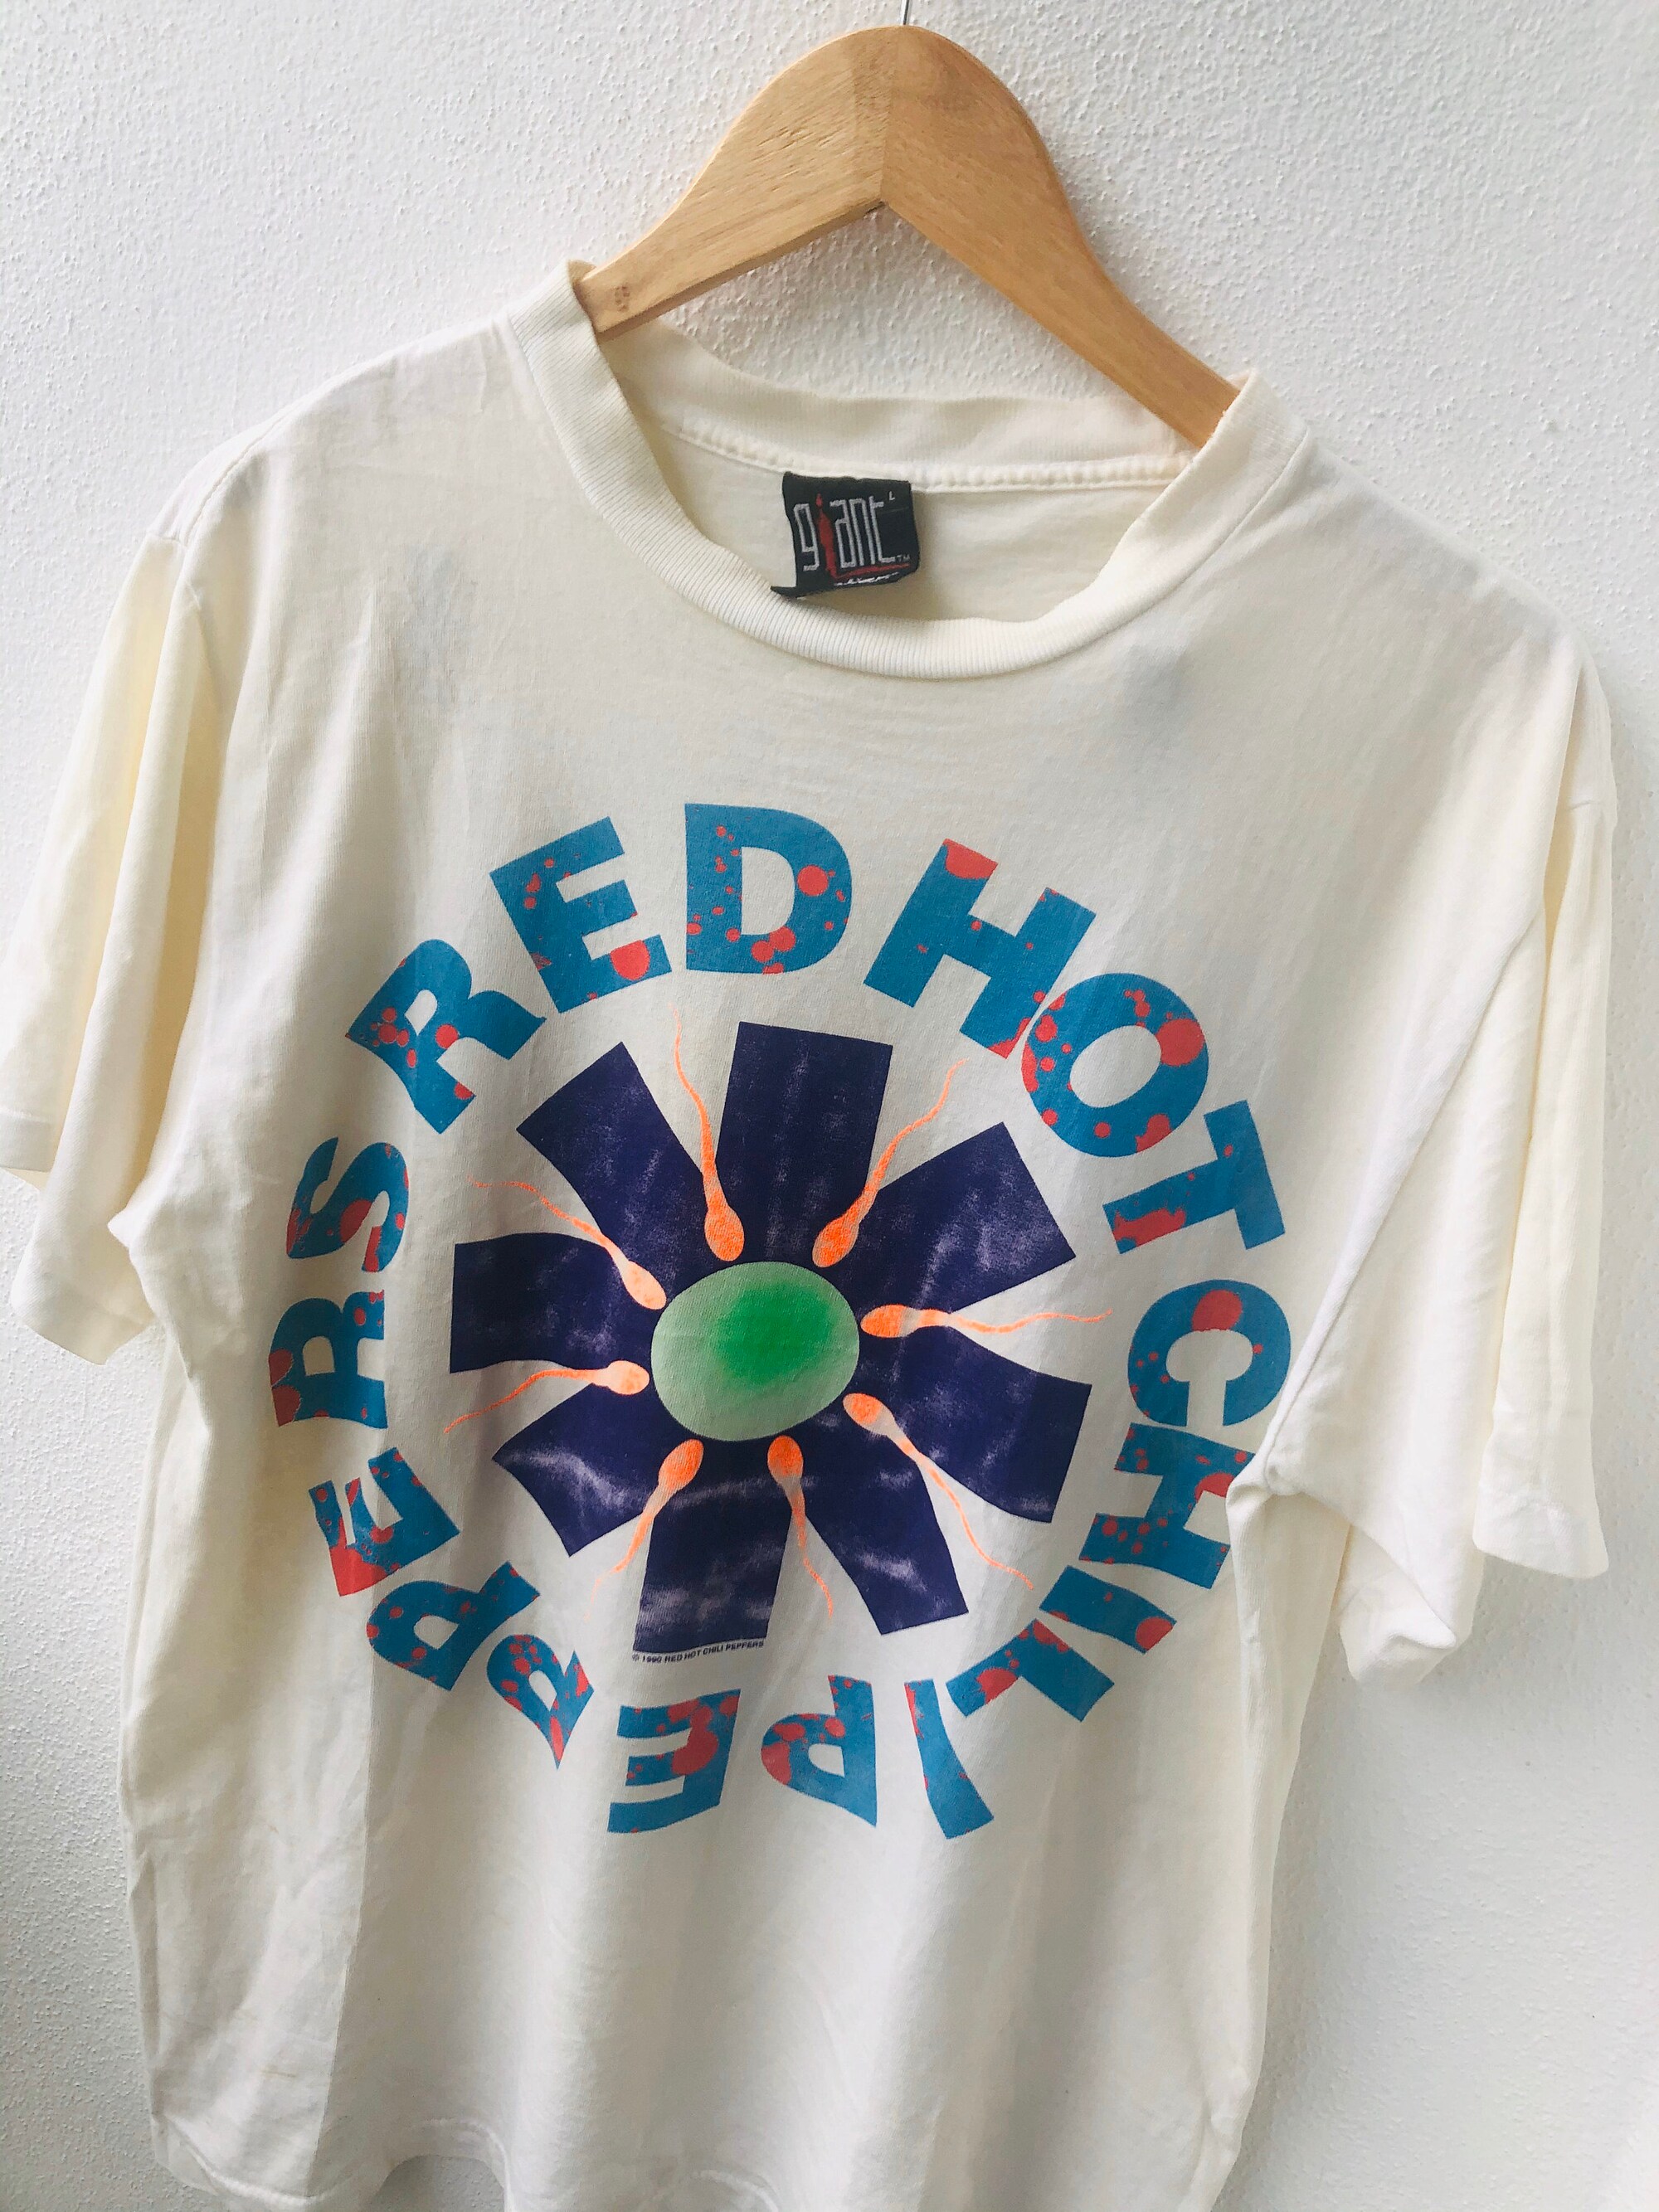 Vintage Original 90's Red Hot Chili Peppers " Sperm Logo 1990" American Funk Music T-Shirt